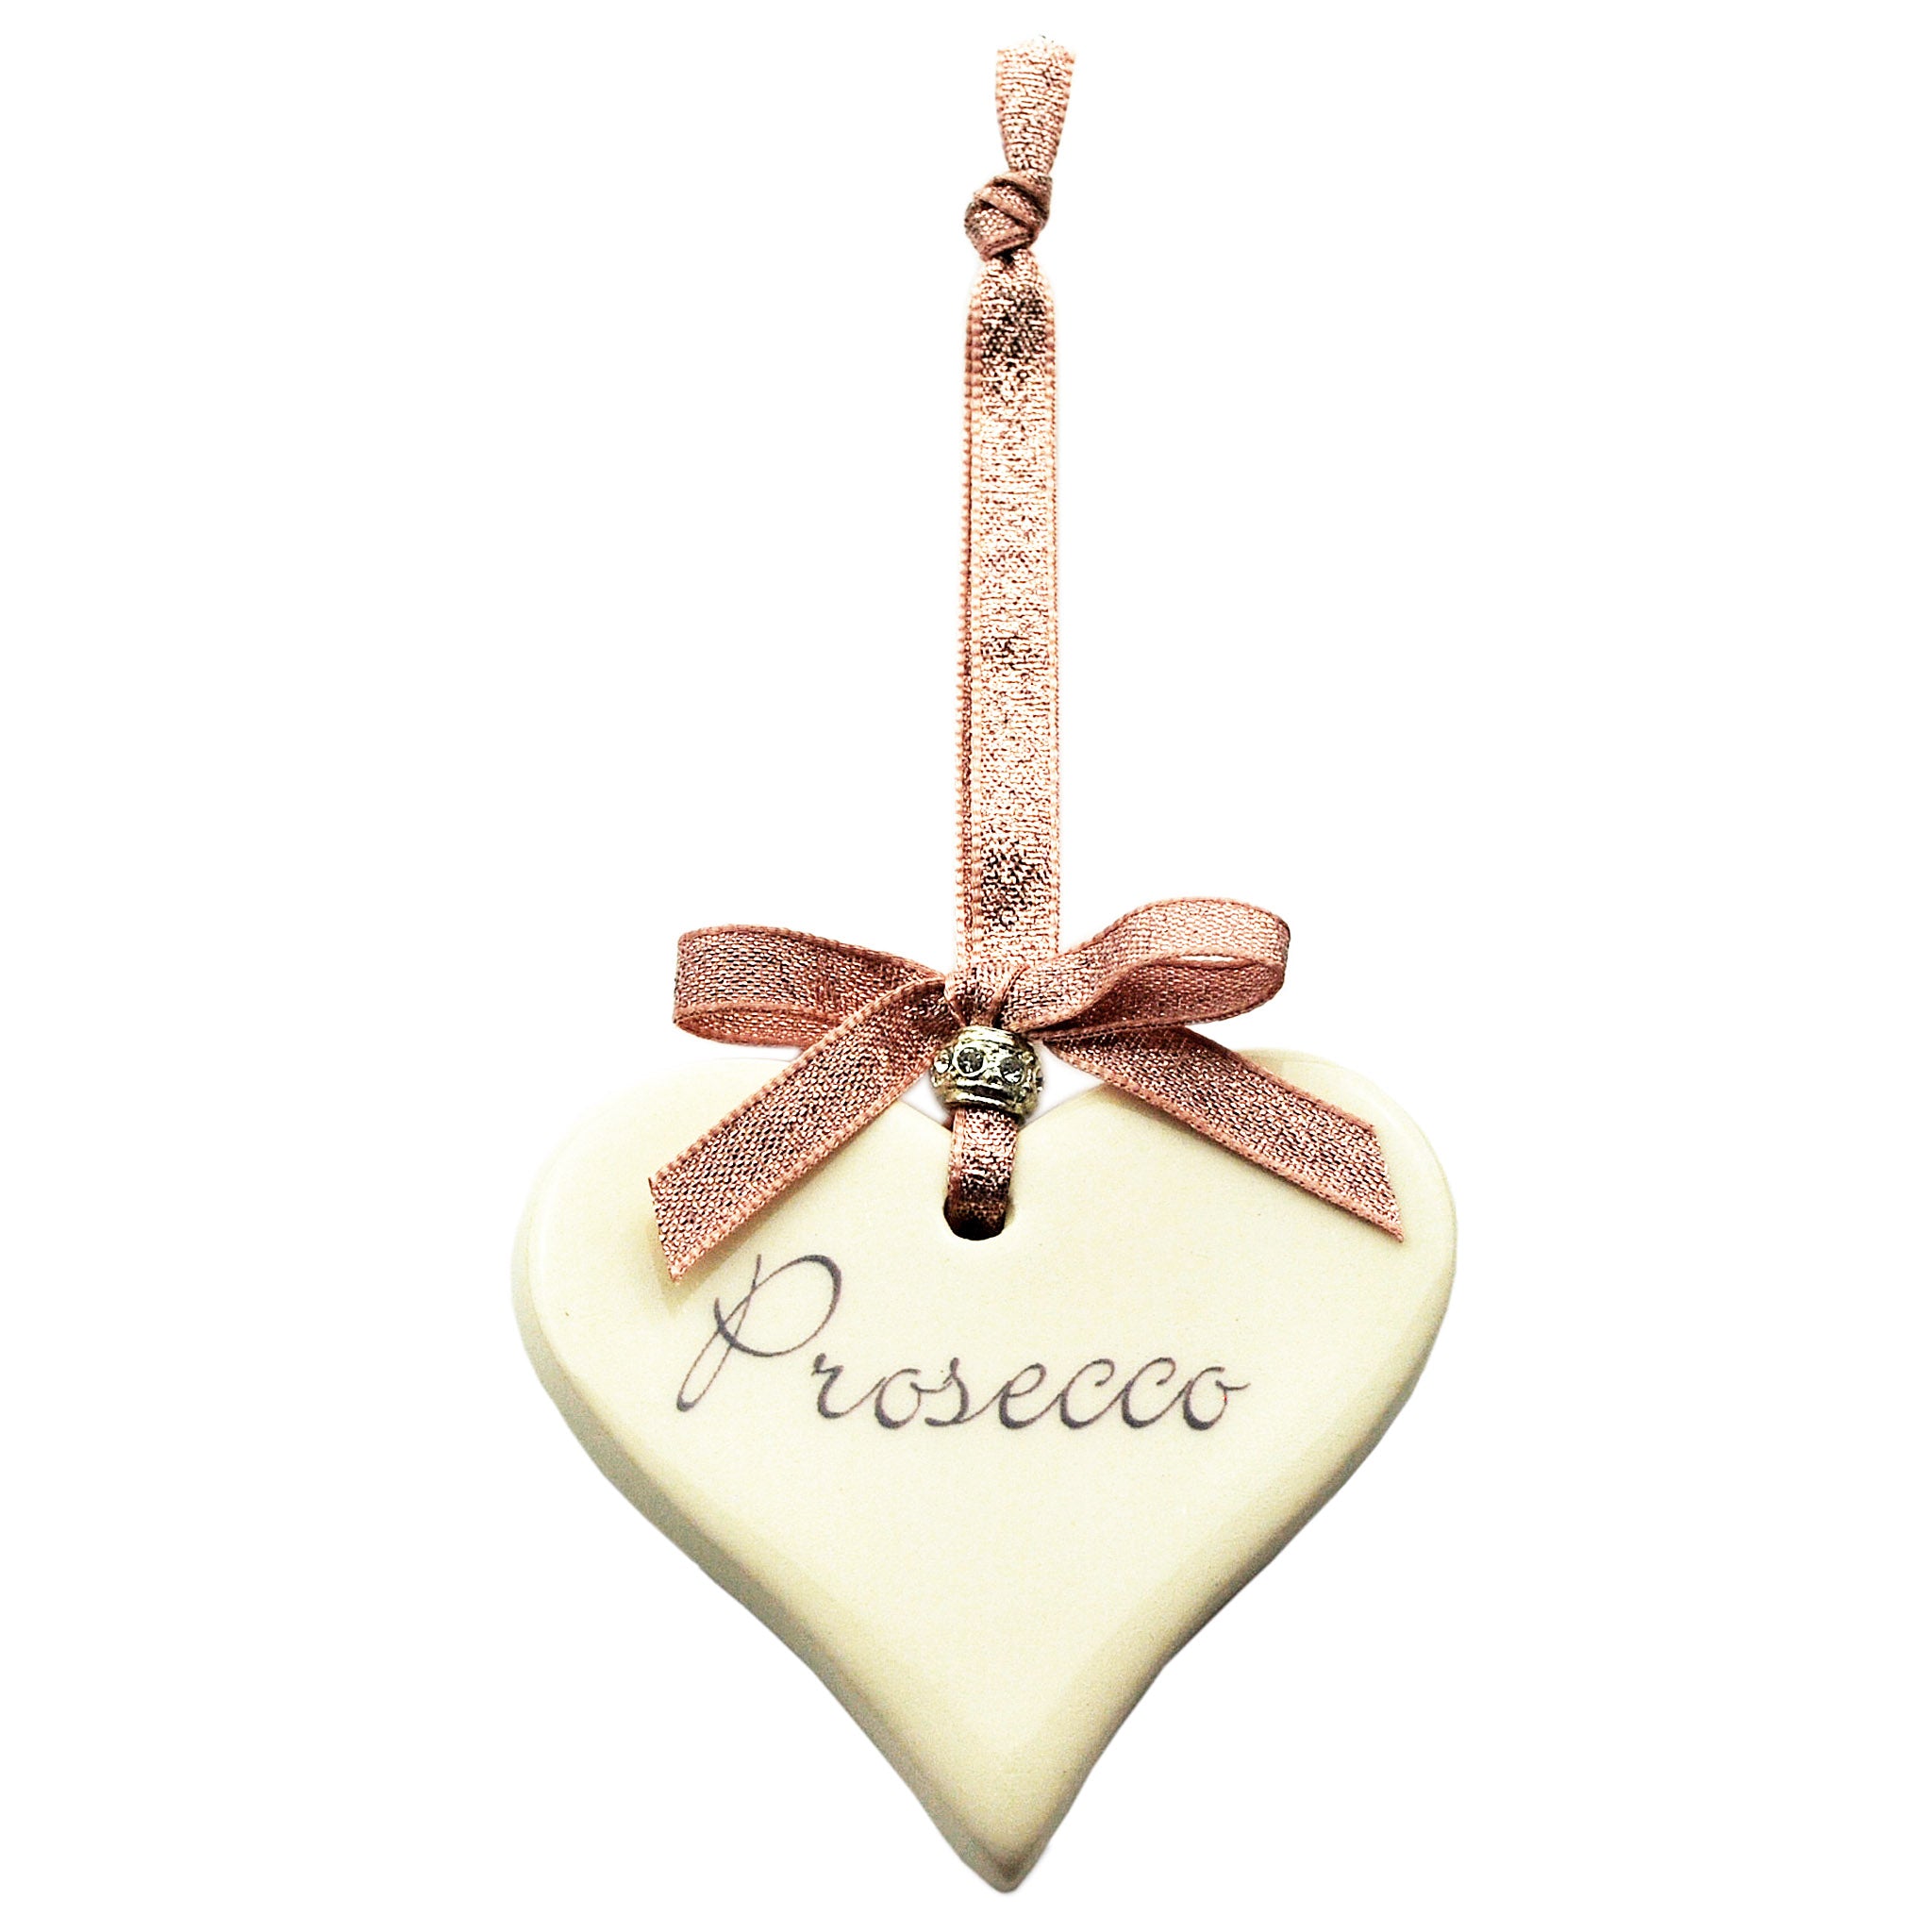 Rose Gold Prosecco Ceramic Heart Decoration perfect gift idea for Mother's Day